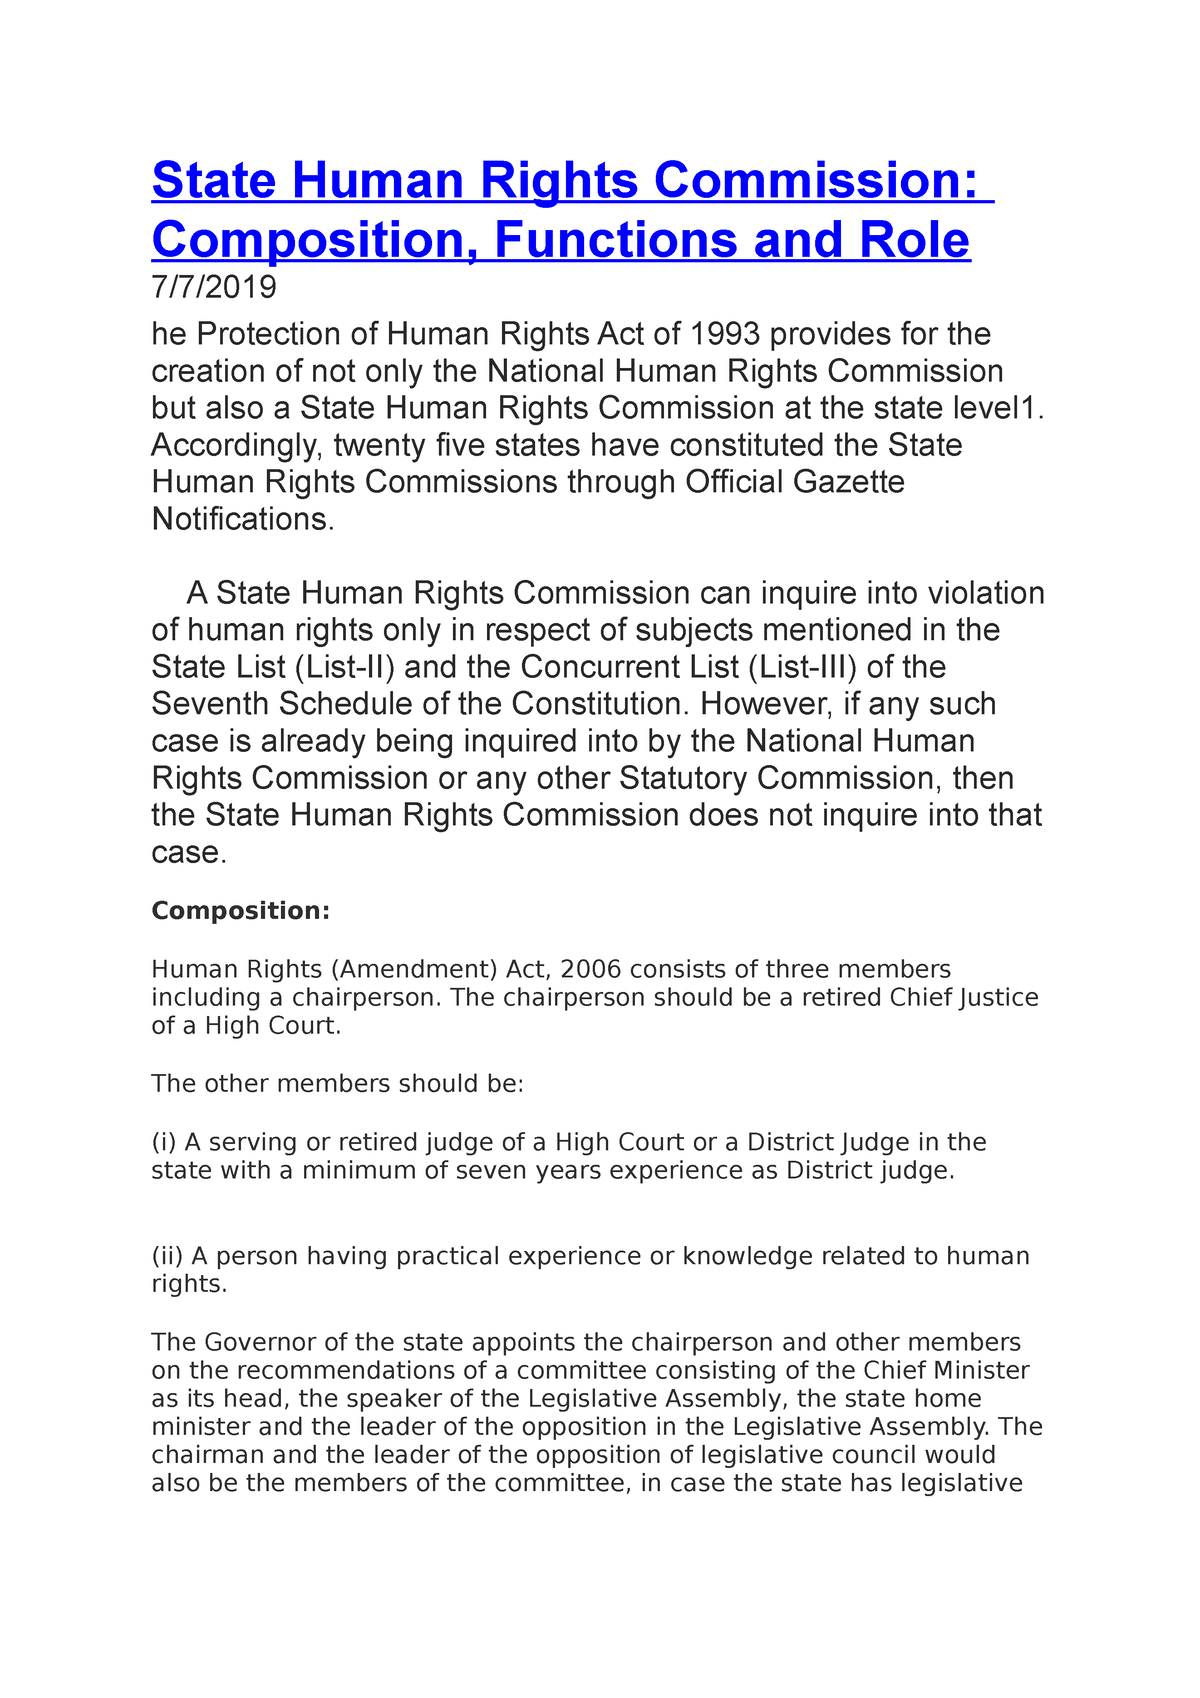 essay on state human rights commission